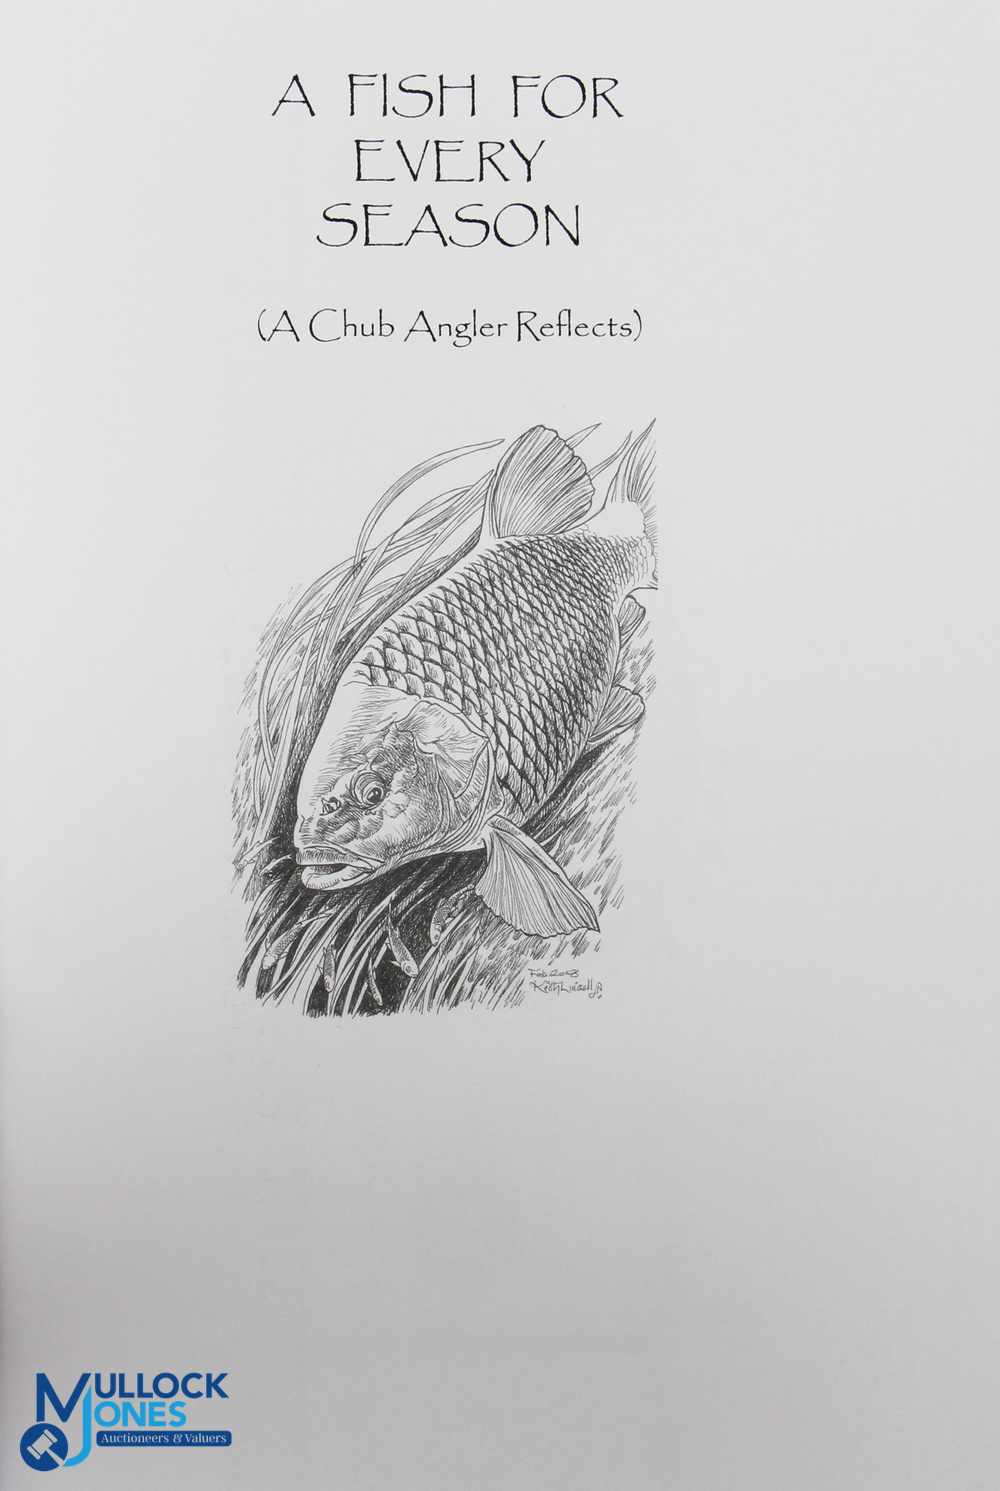 2020 A Fish for Every Season Stewart Allum, a Chub Angler Reflects, signed copy limited edition - Image 2 of 2